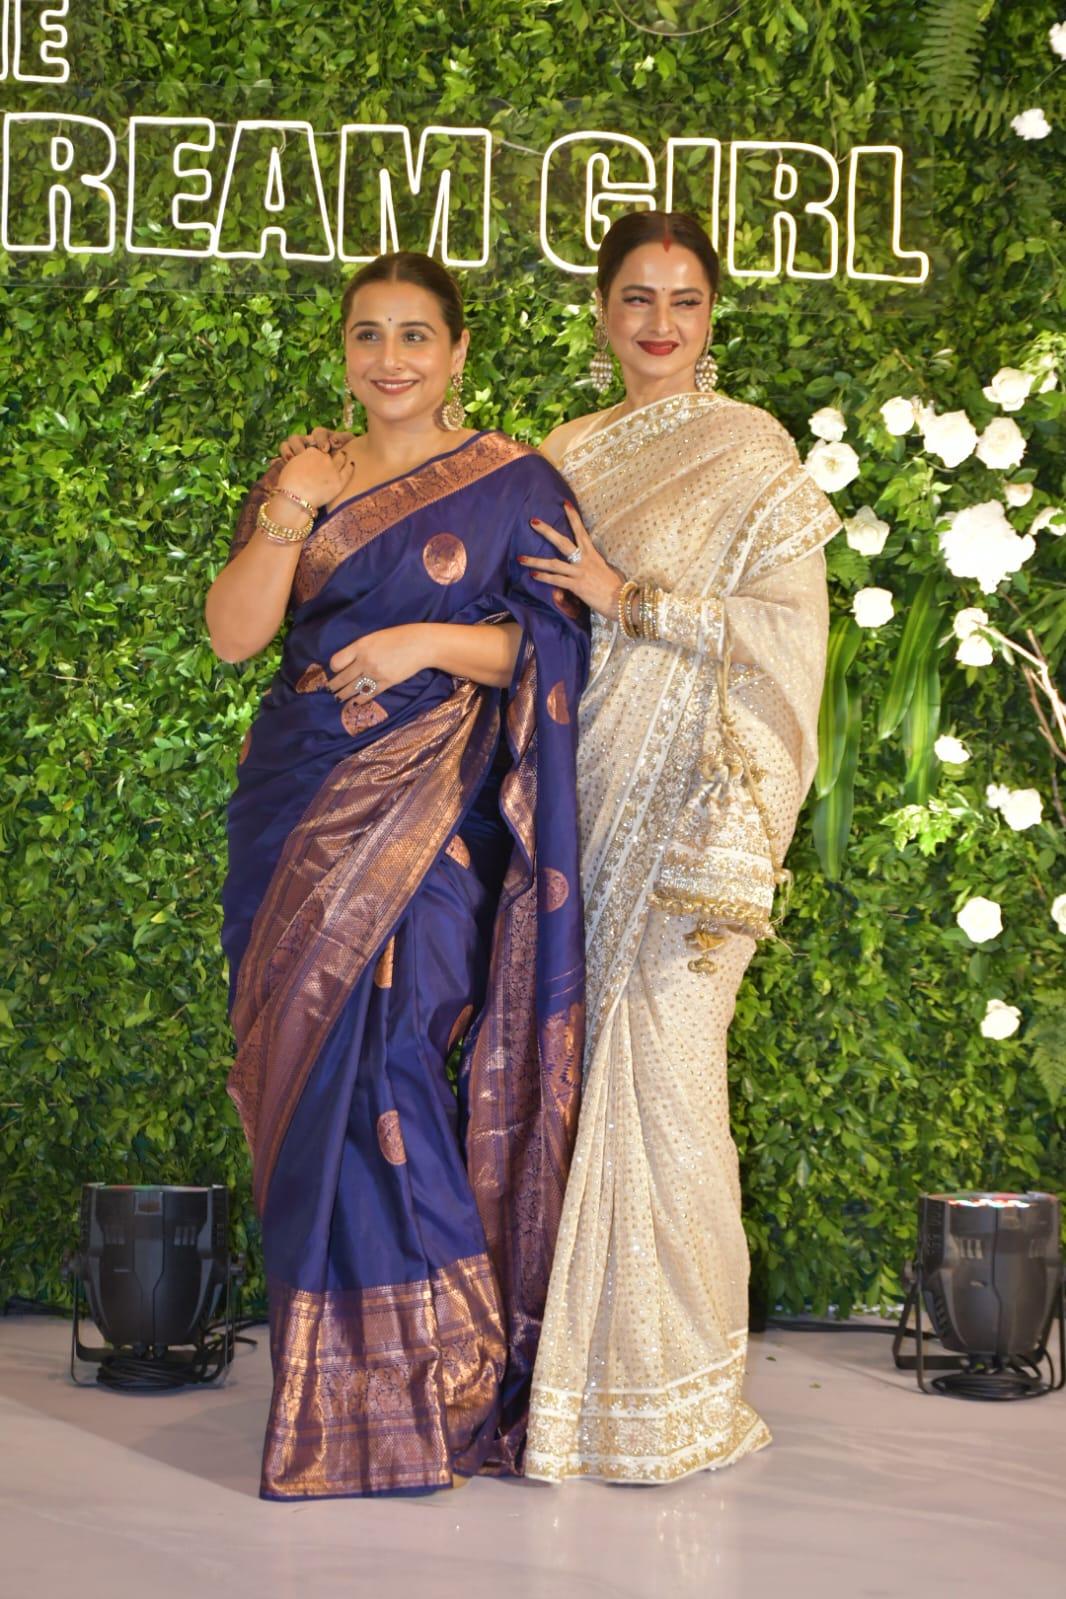 Rekha and Vidya posed for a cute snap that effectively melted all hearts